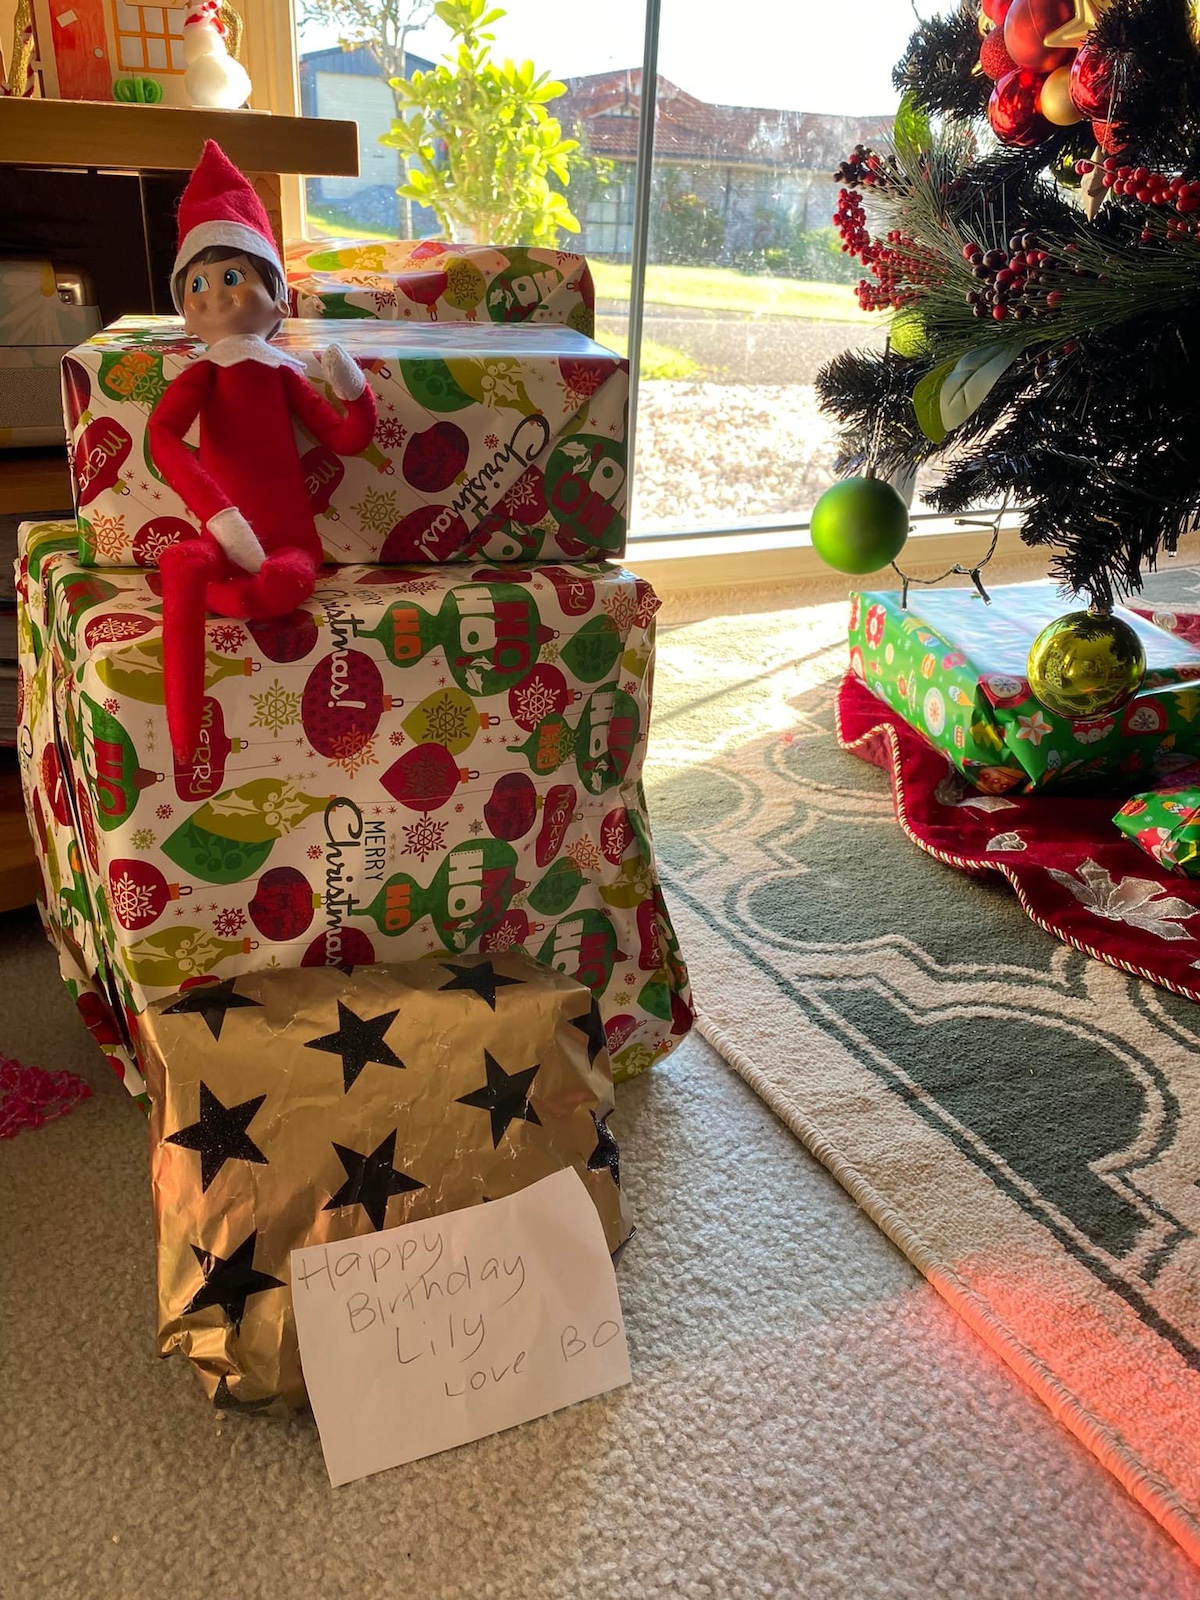 Elf on the shelf sitting on a stack of gifts with a birthday note.